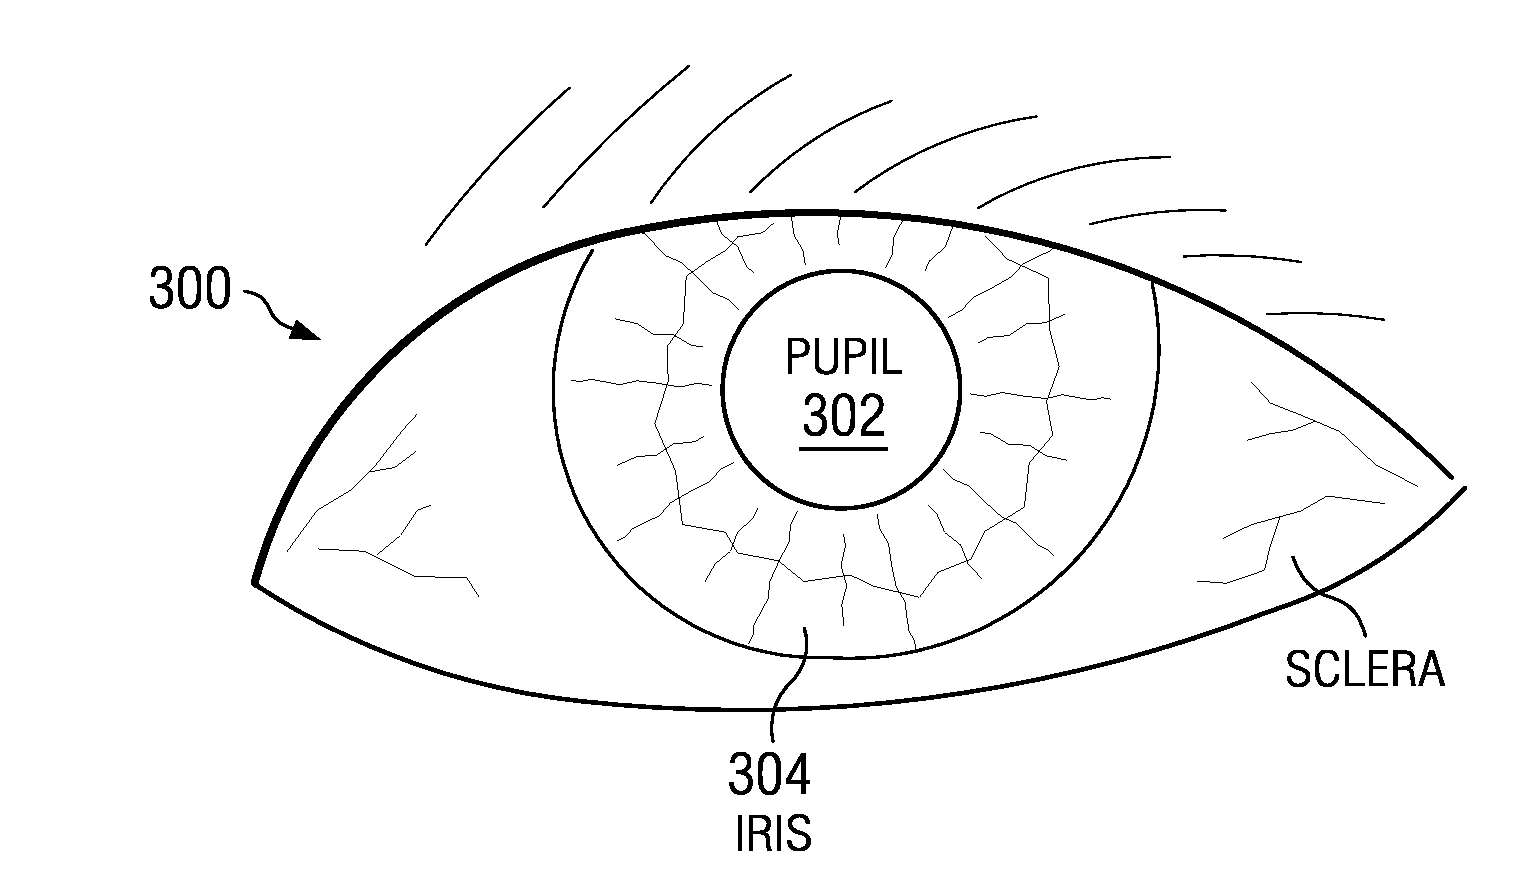 Detecting behavioral deviations by measuring eye movements